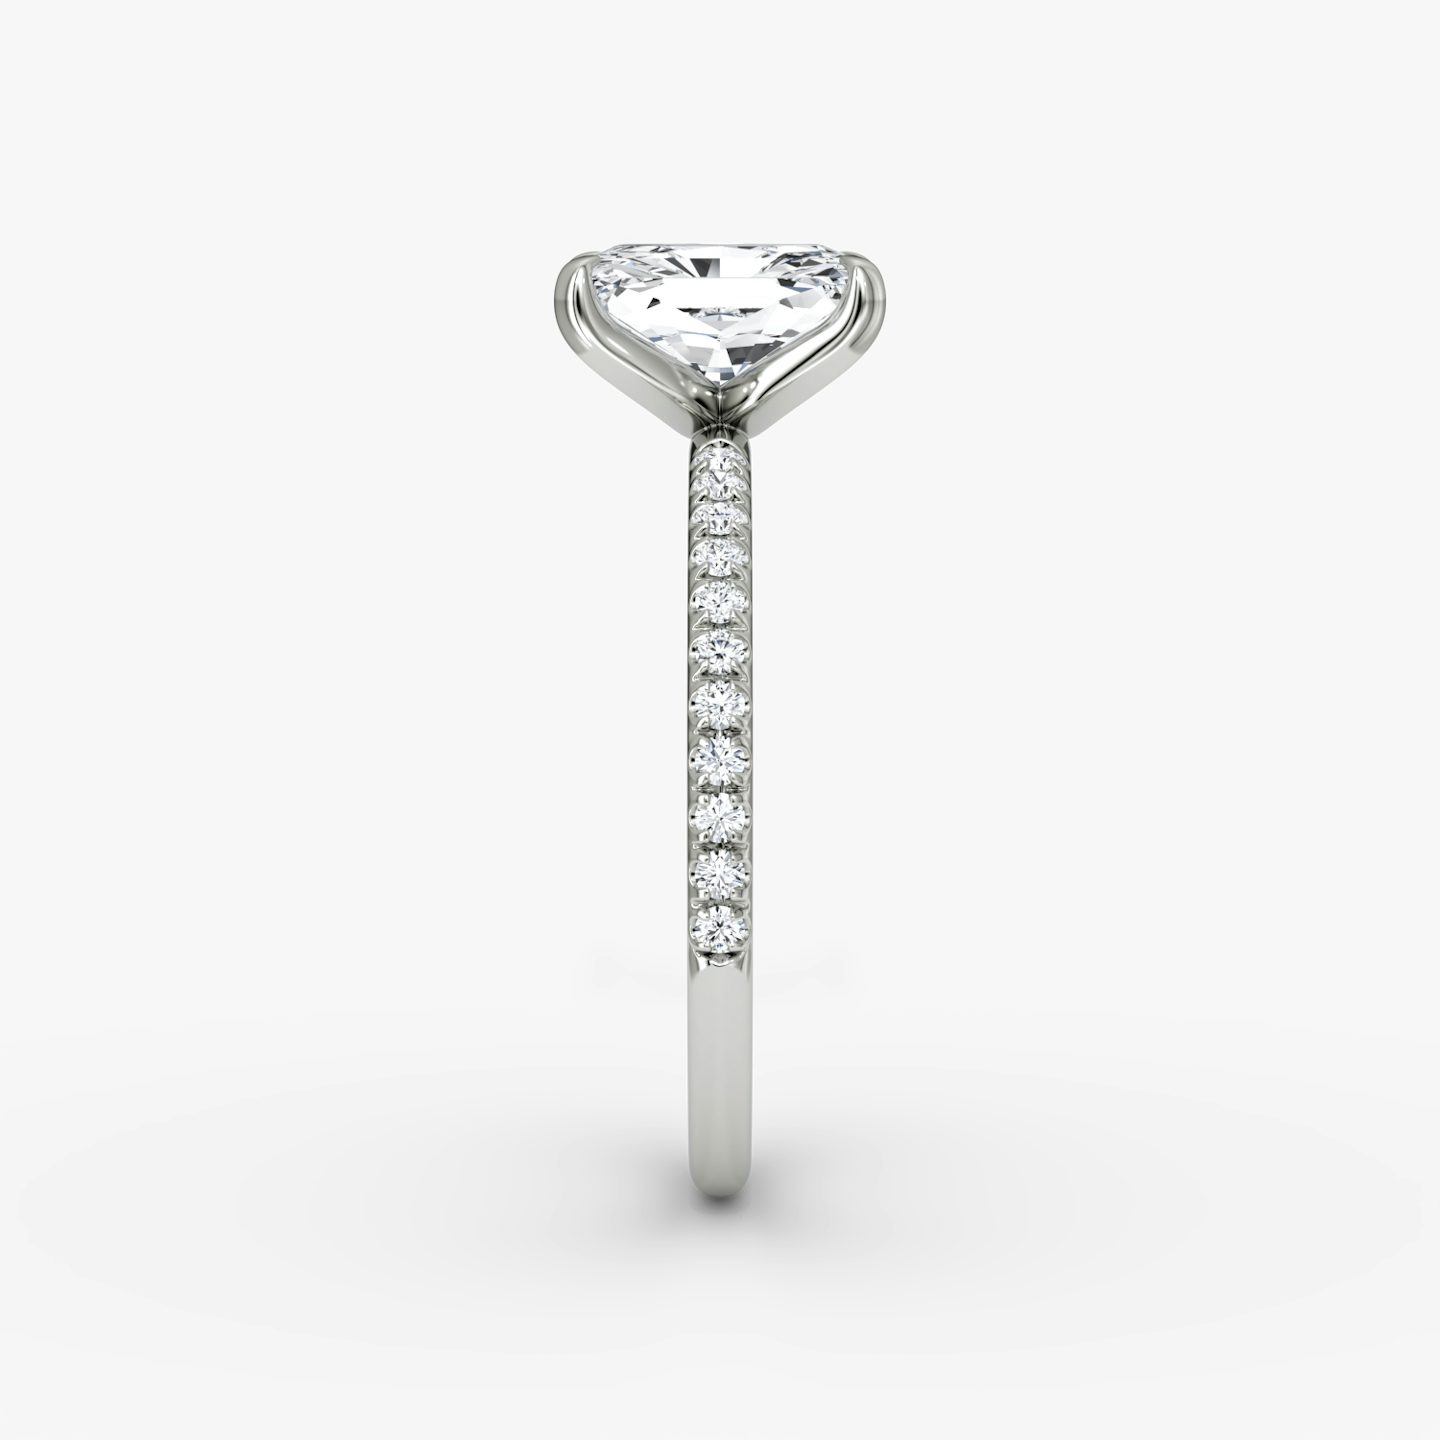 The Classic | radiant | 18k | white-gold | bandWidth: standard | bandAccent: pave | diamondOrientation: vertical | caratWeight: other